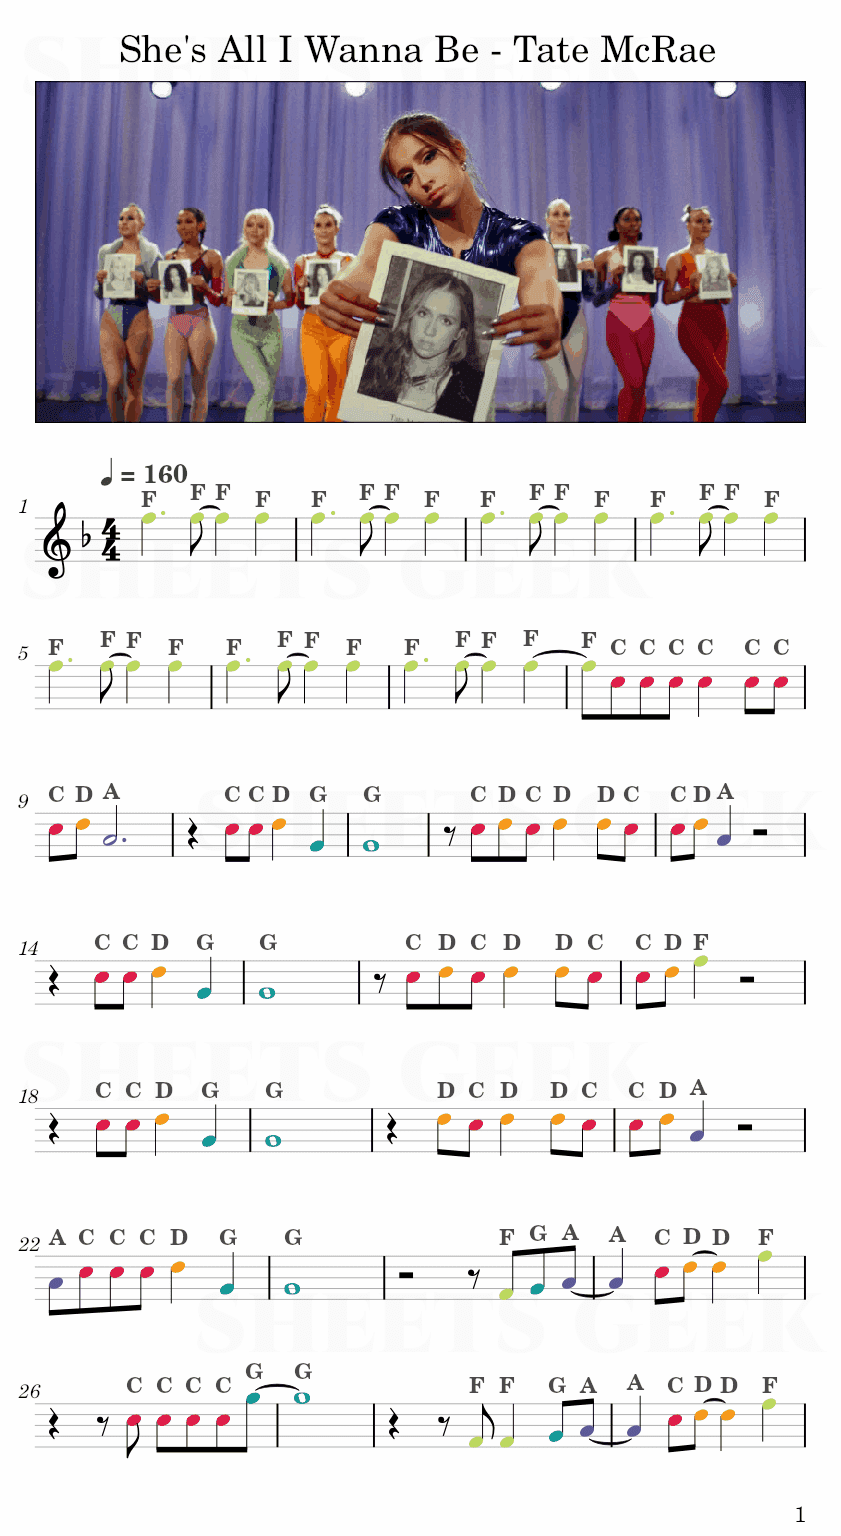 She's All I Wanna Be - Tate McRae Easy Sheet Music Free for piano, keyboard, flute, violin, sax, cello page 1